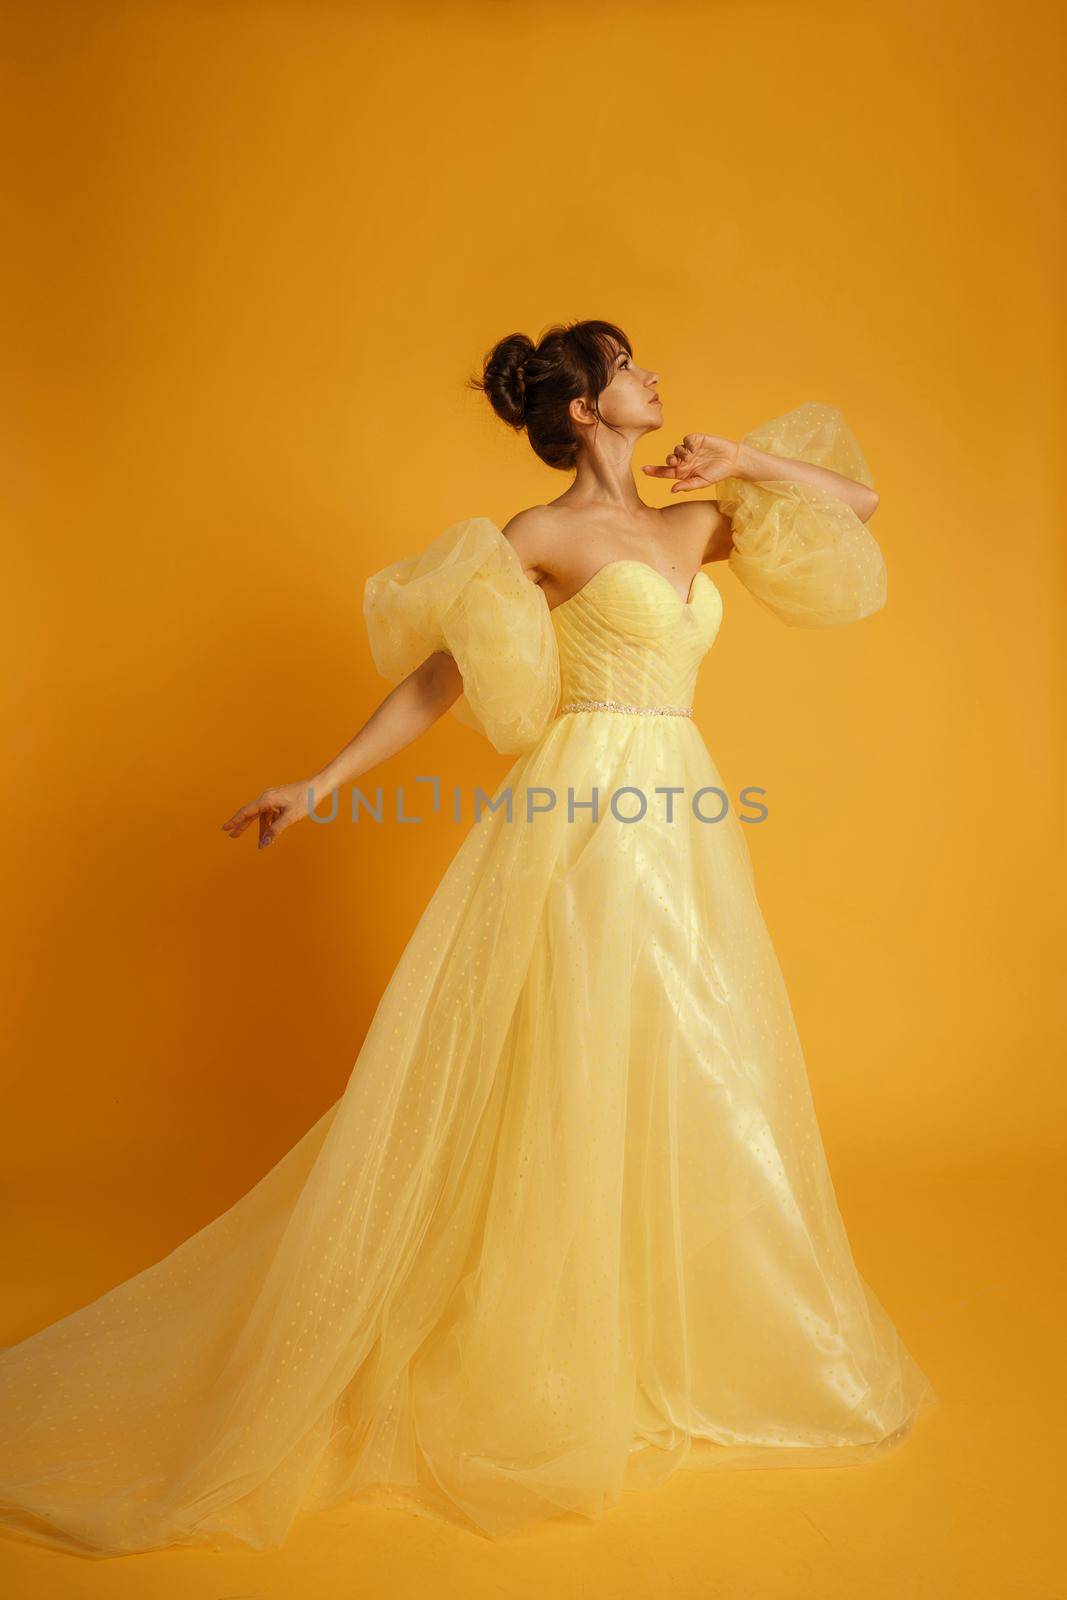 Profile portrait of a beautiful middle-aged woman in a yellow dress, her hair pulled up against a yellow background by Matiunina